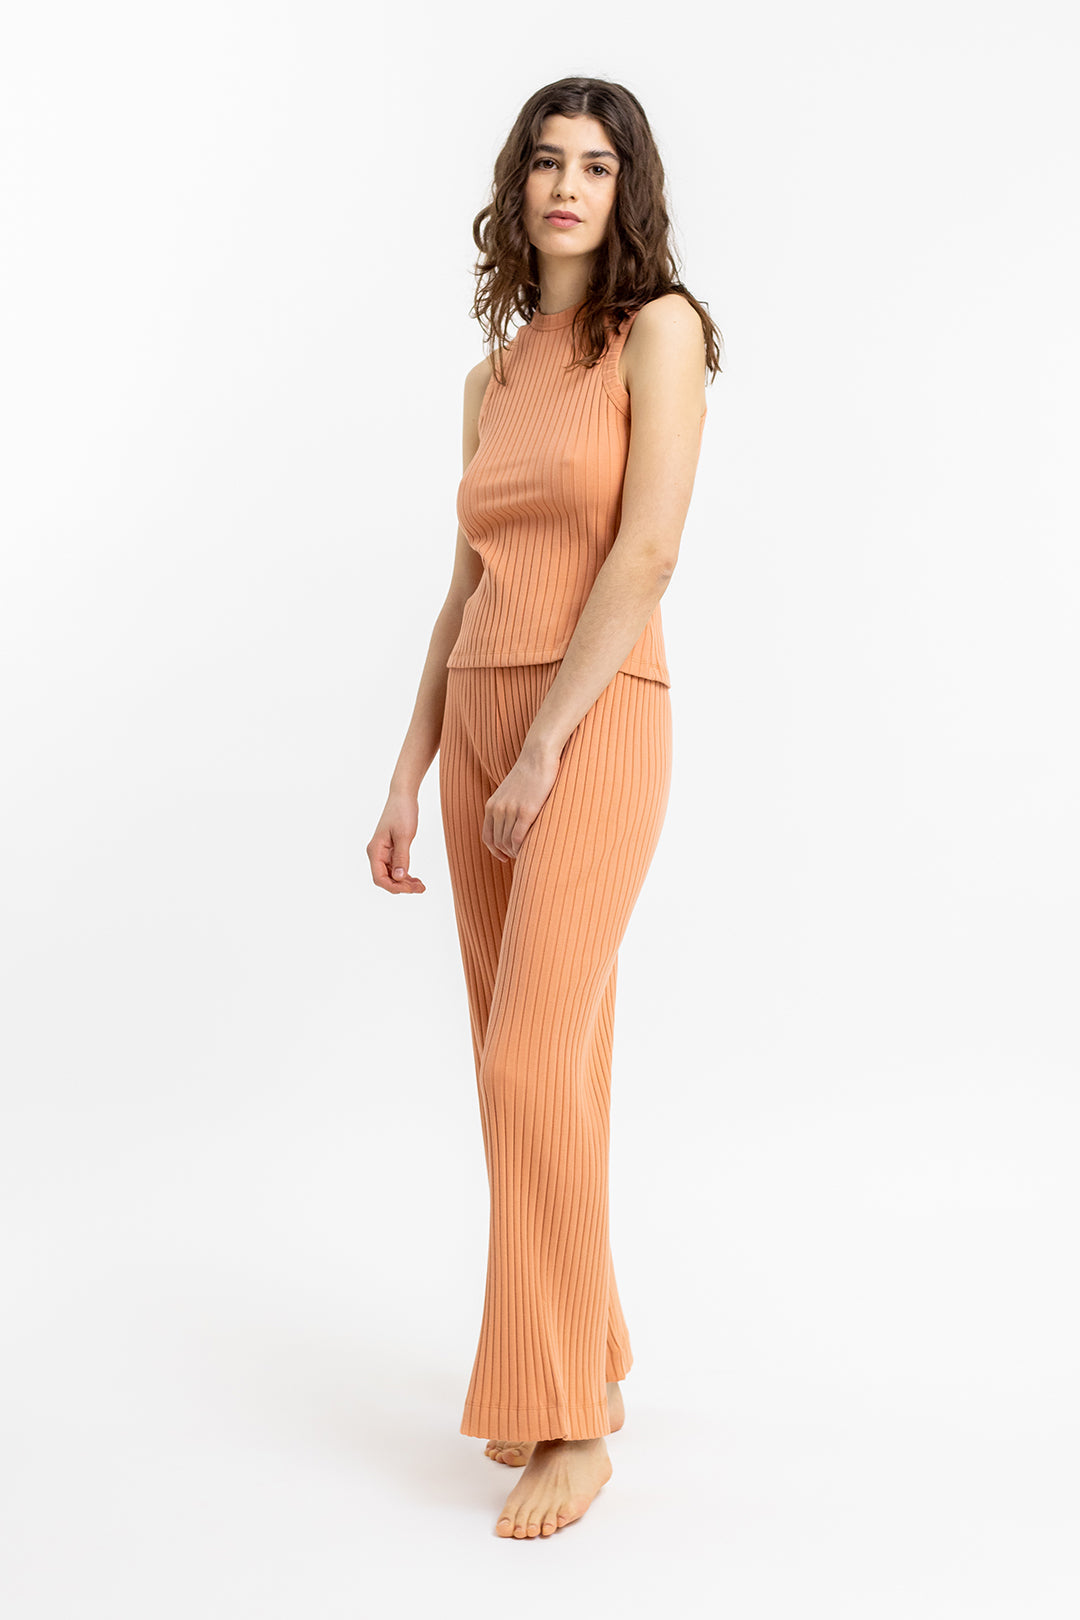 Orange, ribbed Lounge trousers made from organic cotton by Rotholz